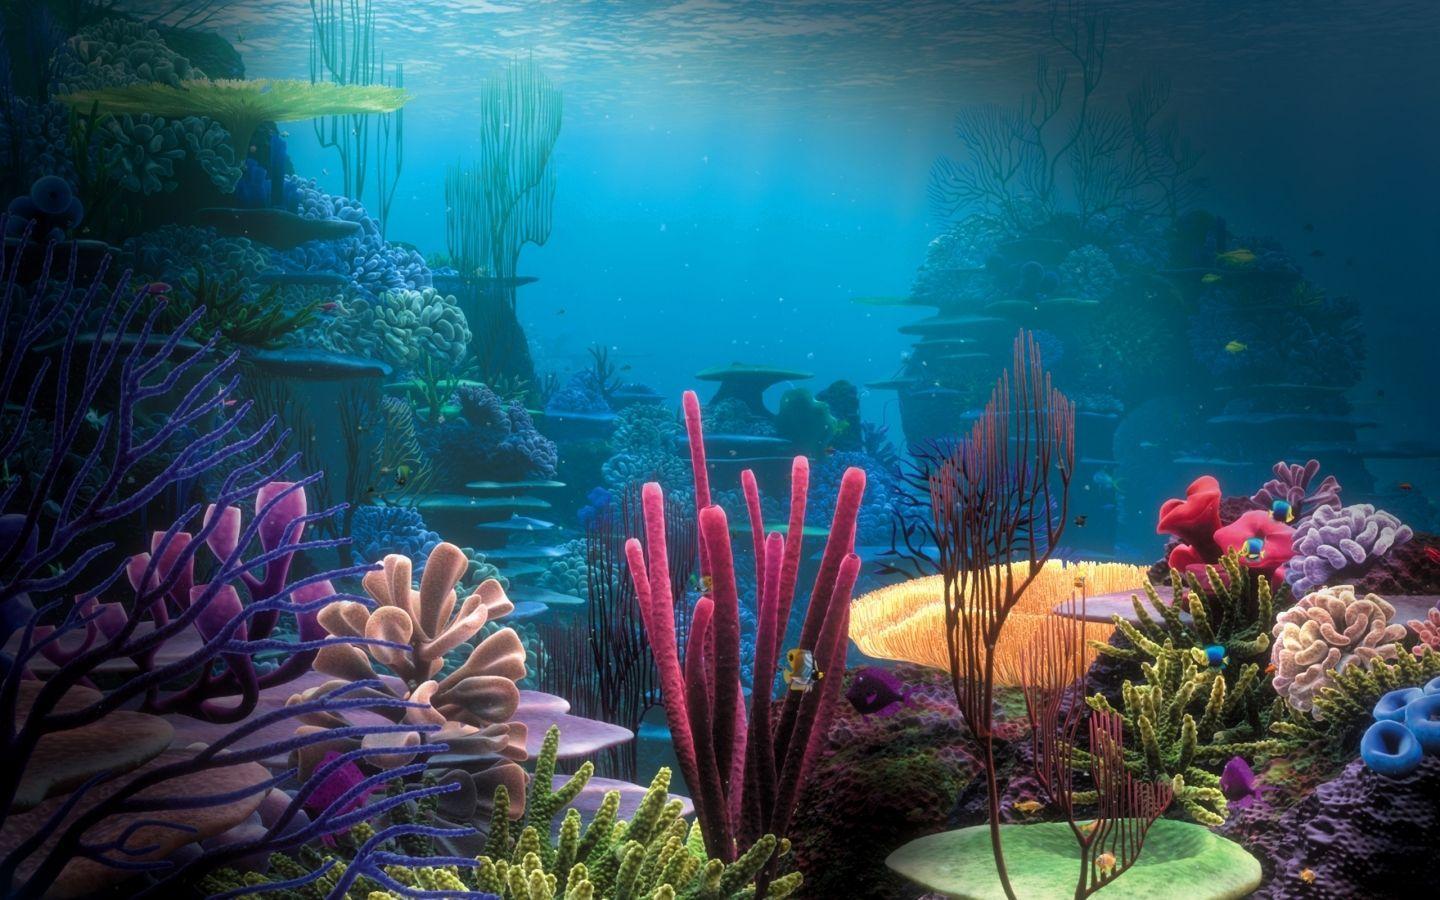 Under The Sea Wallpapers Wallpaper Cave